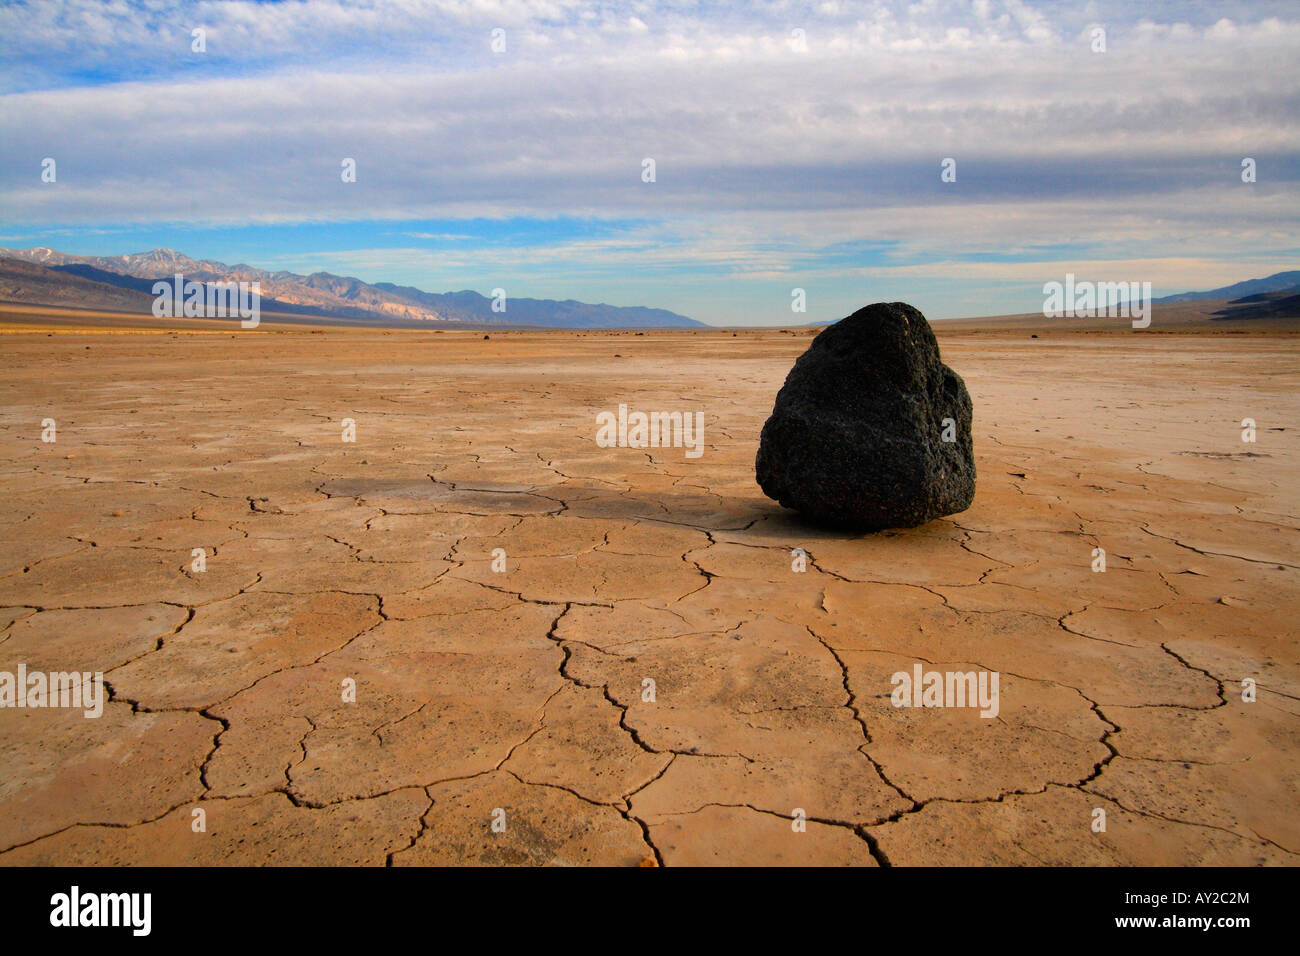 Dry Lake Bed (Playa) with single rock near Death Valley, California Stock Photo